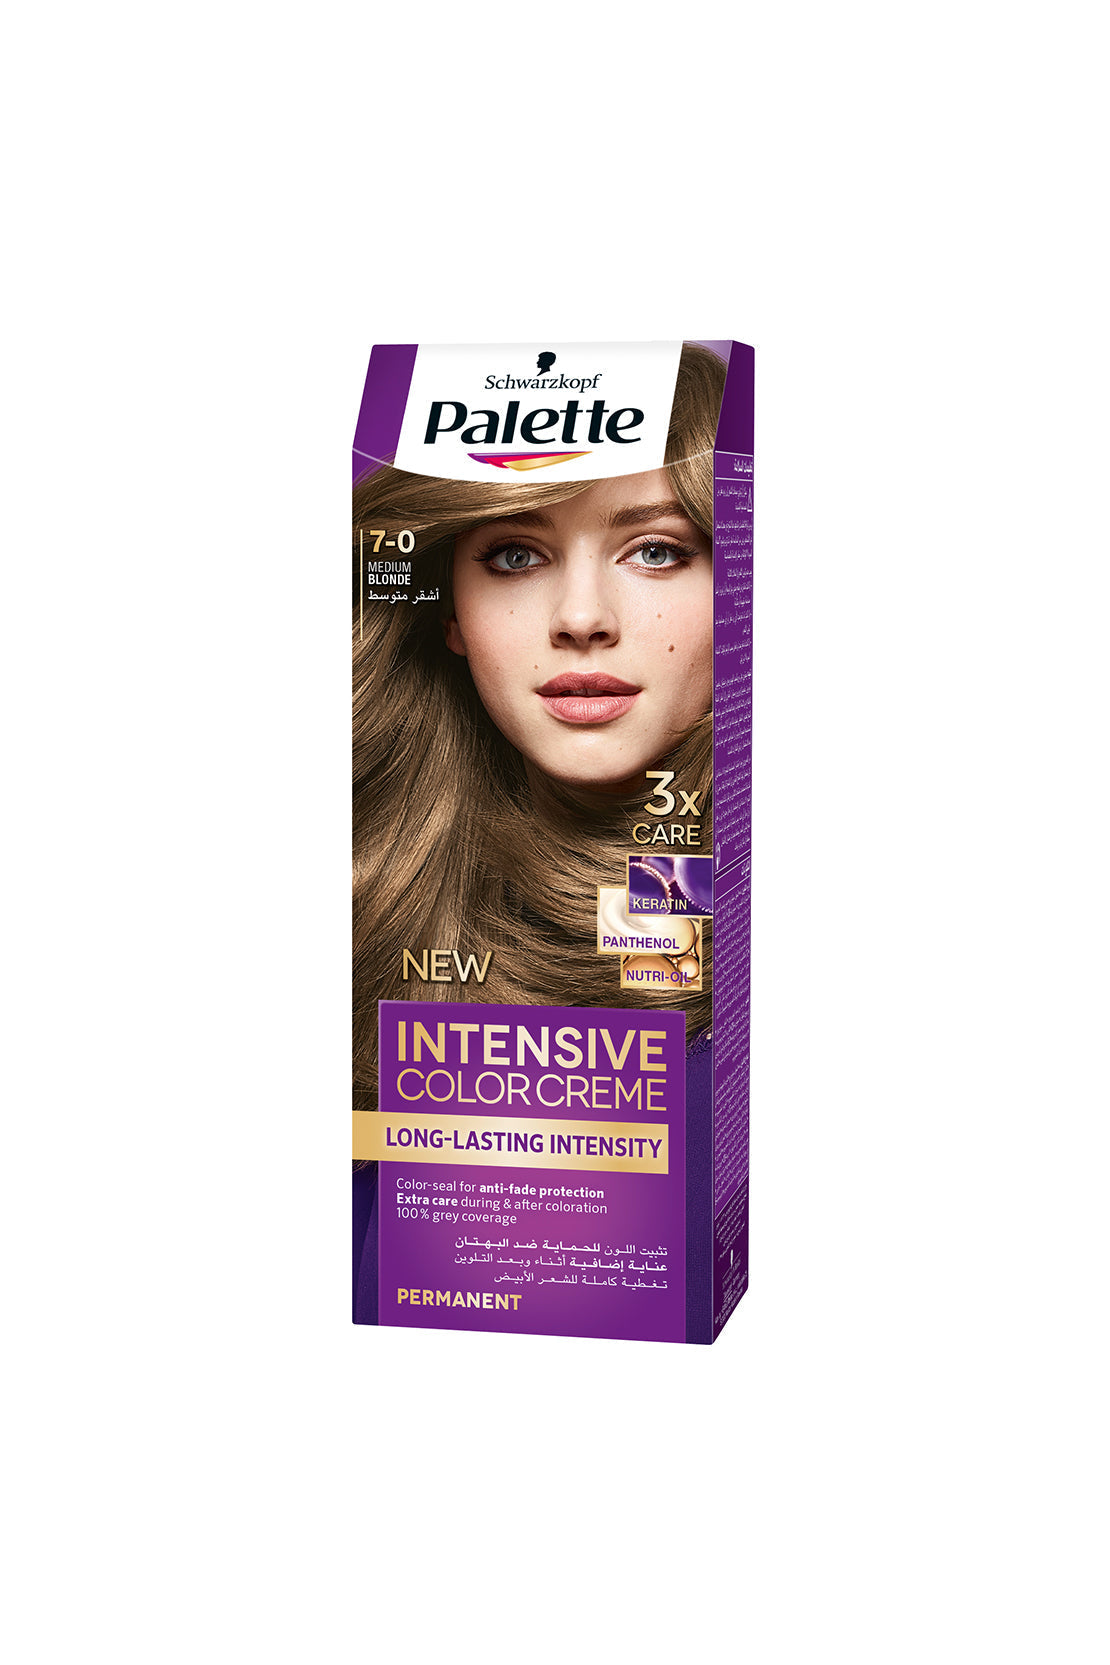 Intensive Color Creme with Long Lasting Intensity (7-0 Blonde) RIOS